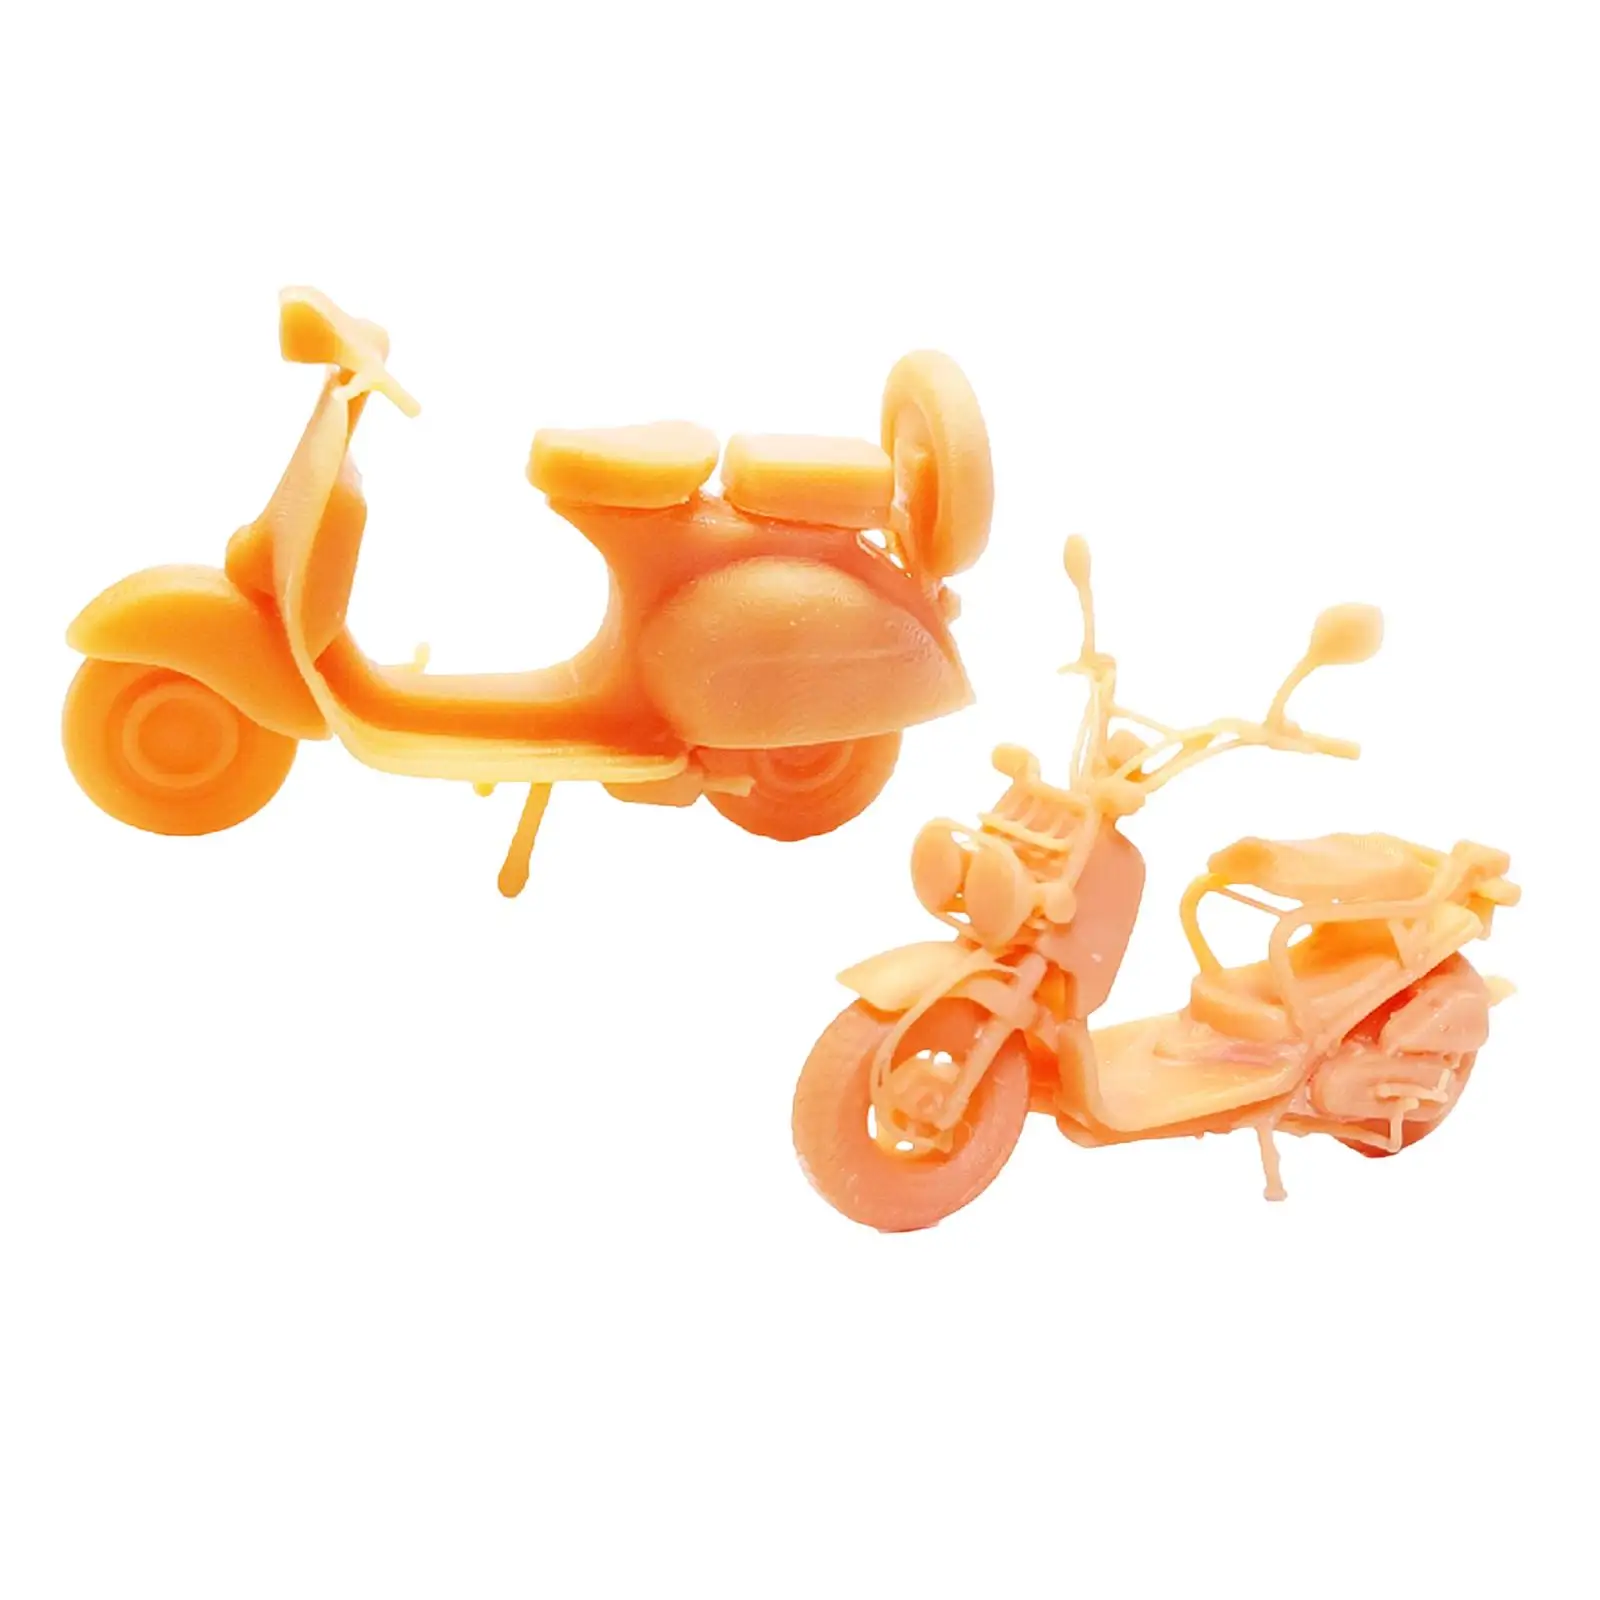 1:64 Diorama Street Motorcycle Model Diorama Motorcycle Toys for Photography Props Miniature Scene Dollhouse Diorama Accessories